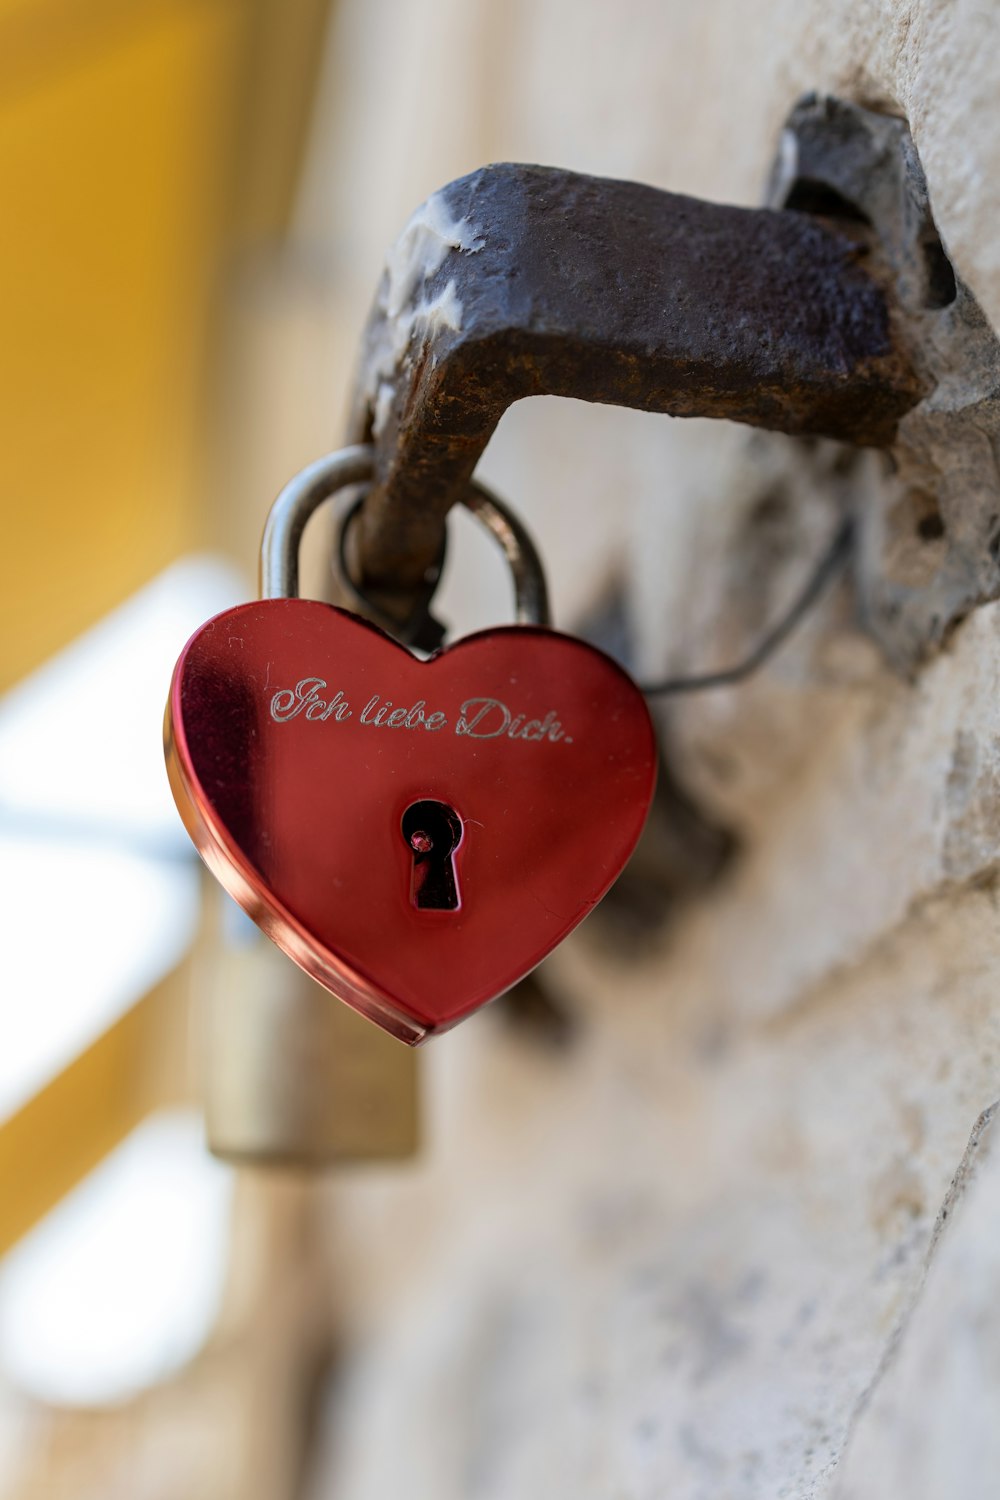 a heart shaped padlock attached to a wall